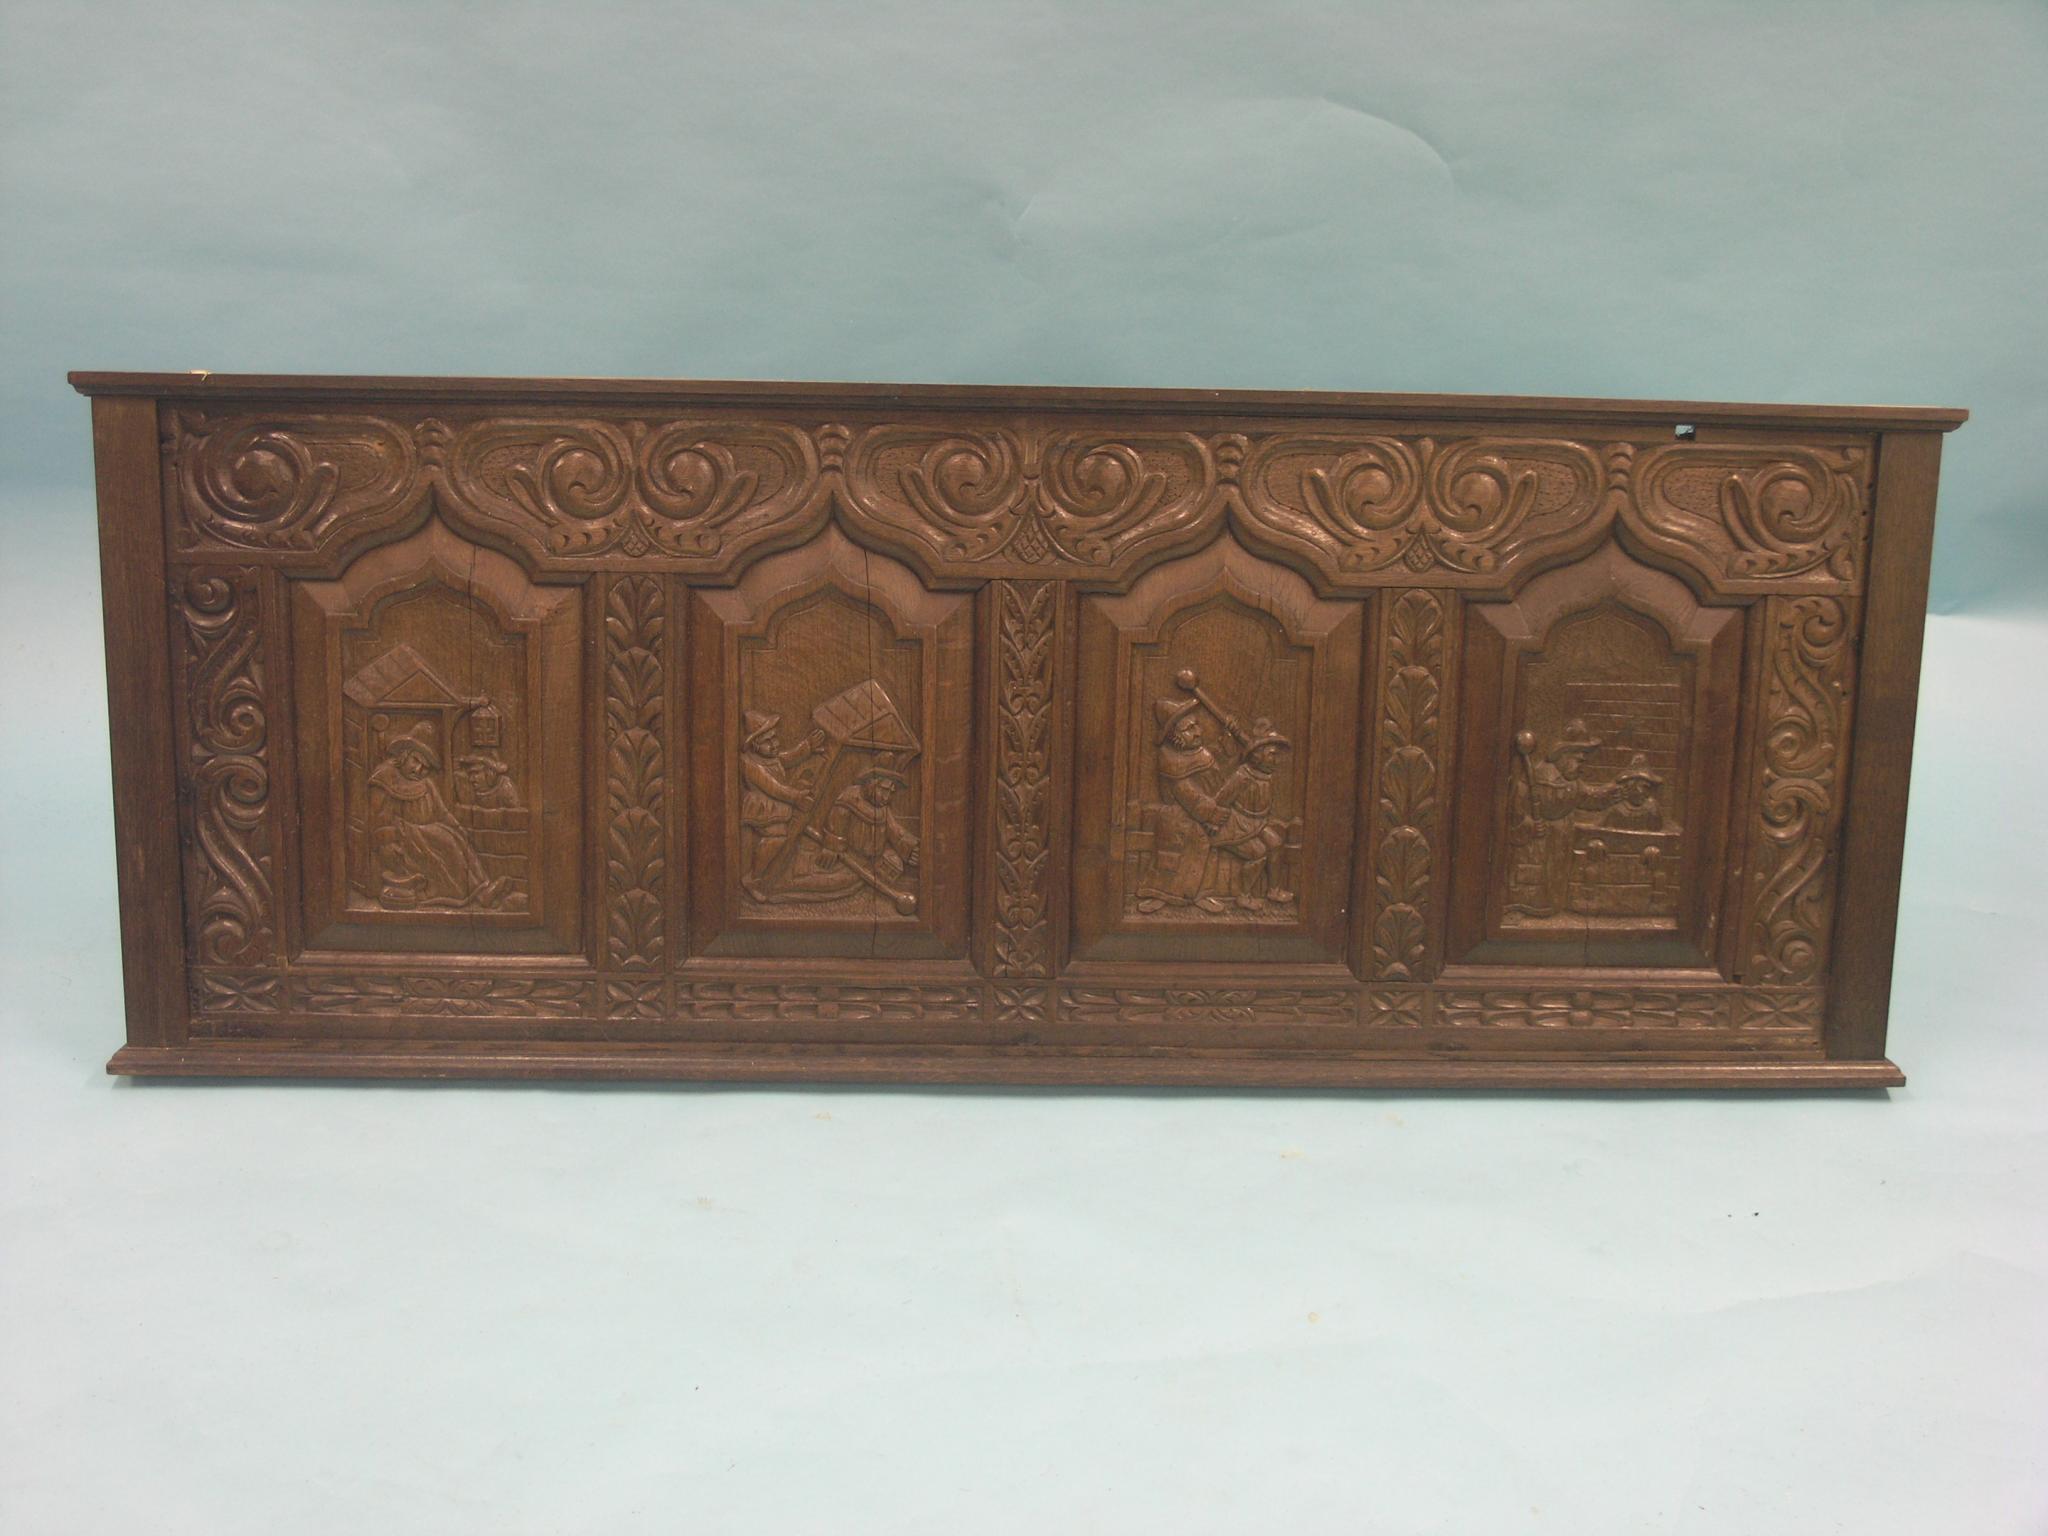 Two large oak Flemish panellings, all panels carved with figures at various pursuits, 4ft. 10in. - Image 2 of 2